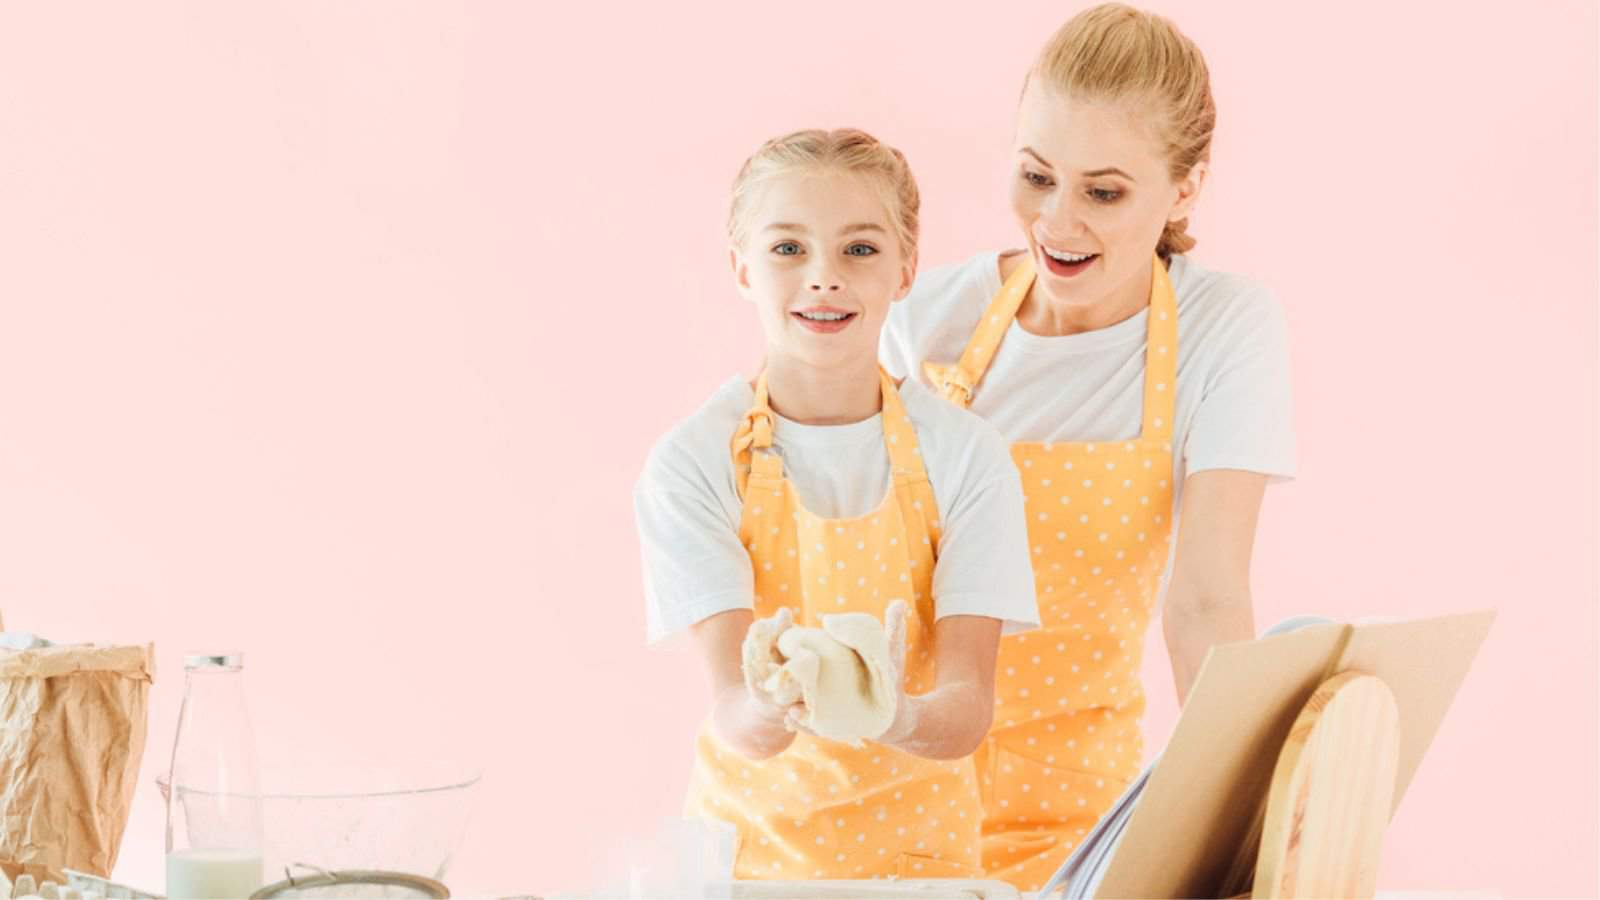 Surprised young mother looking at daughter kneading dough